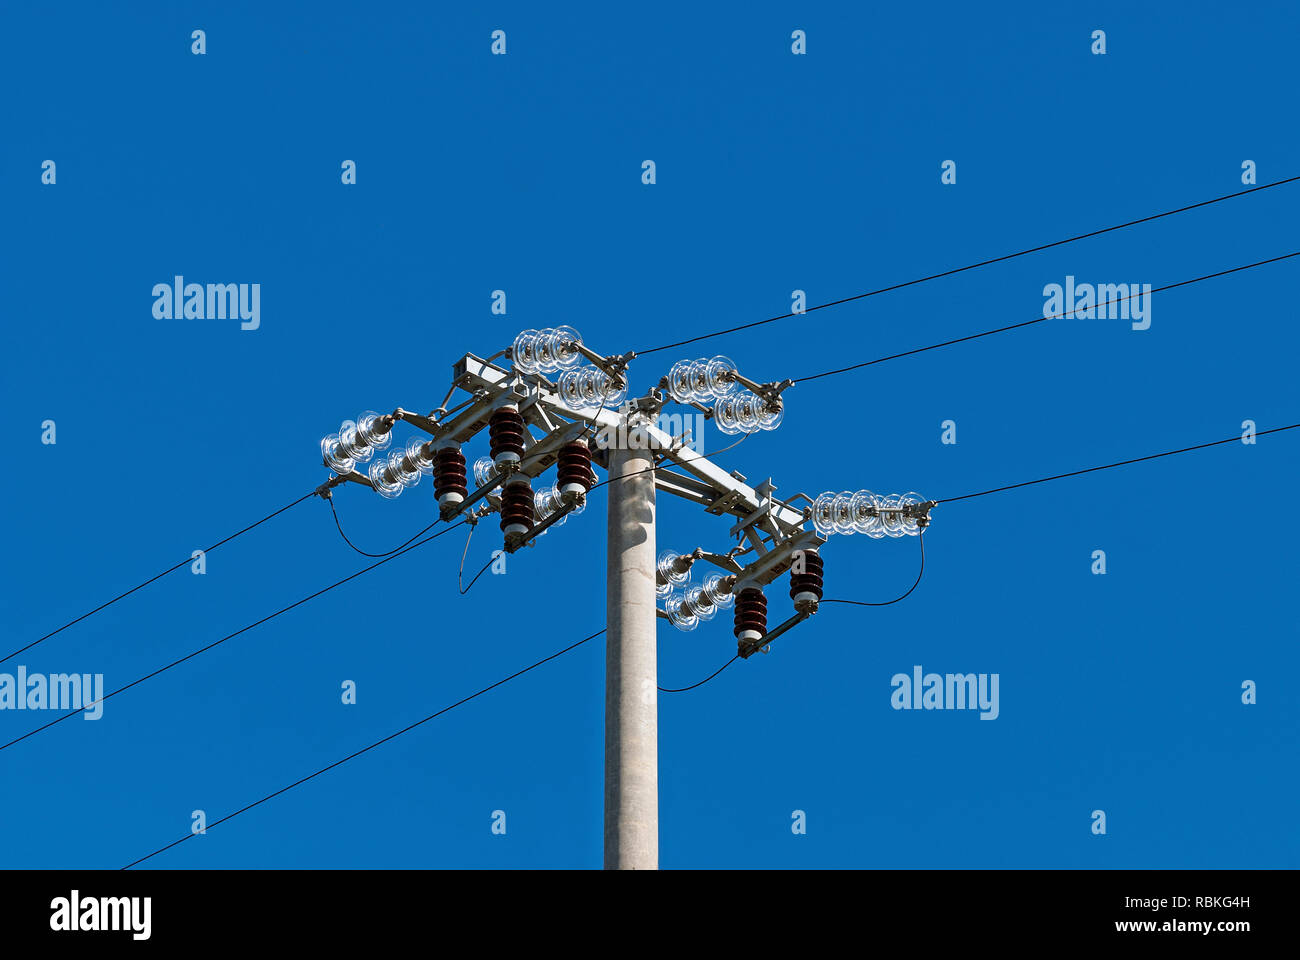 Hydro pole with arresters and wires Stock Photo